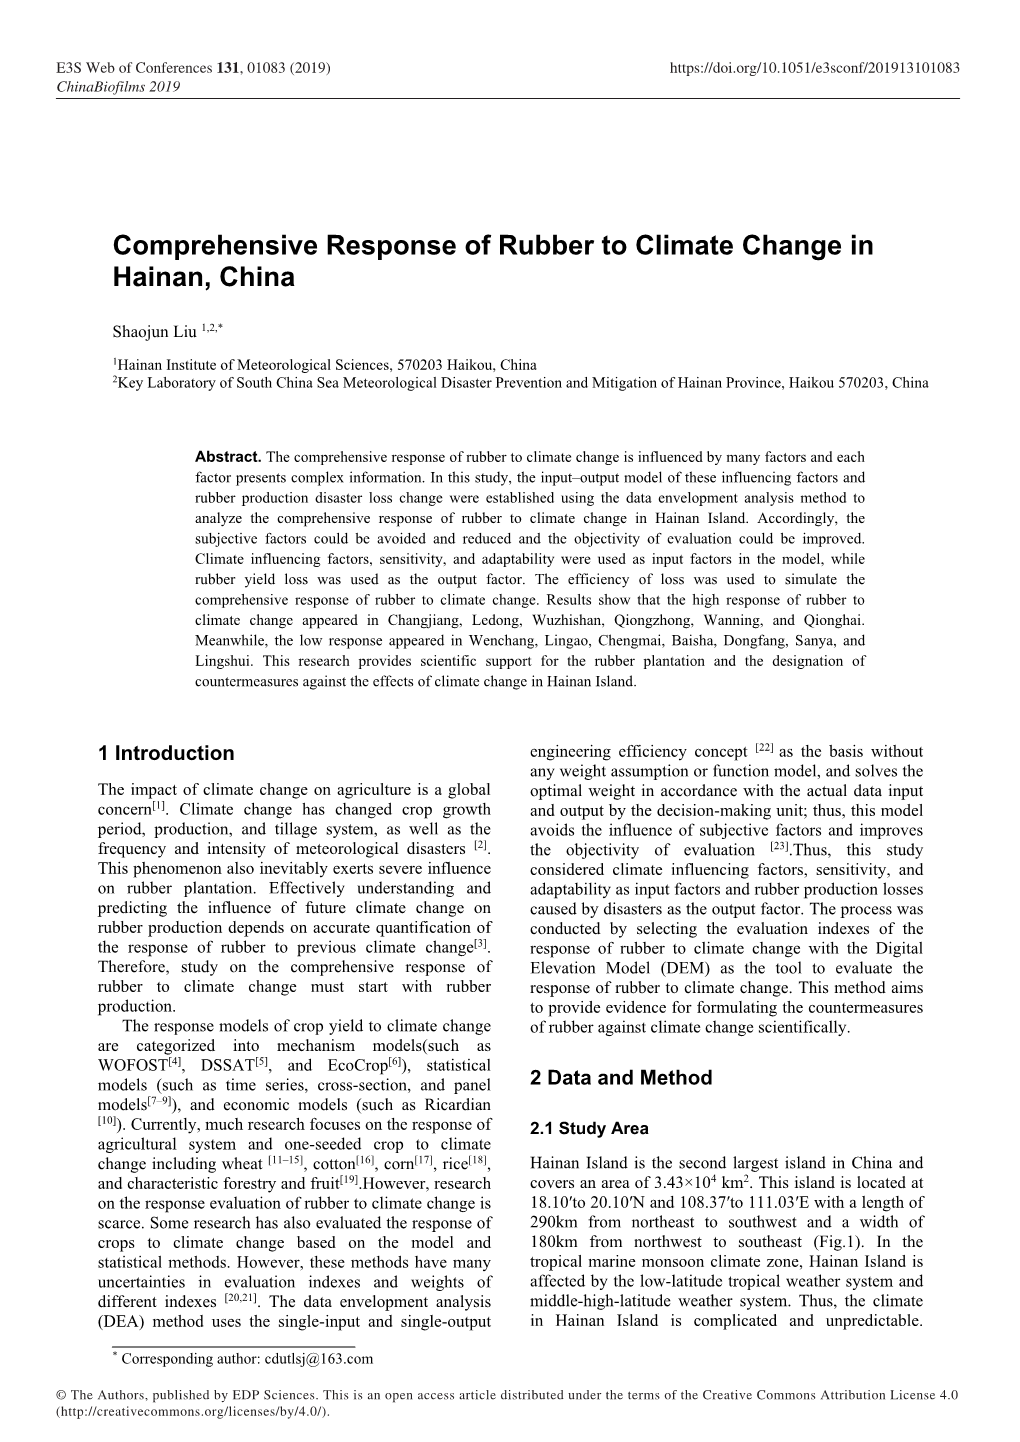 Comprehensive Response of Rubber to Climate Change in Hainan, China